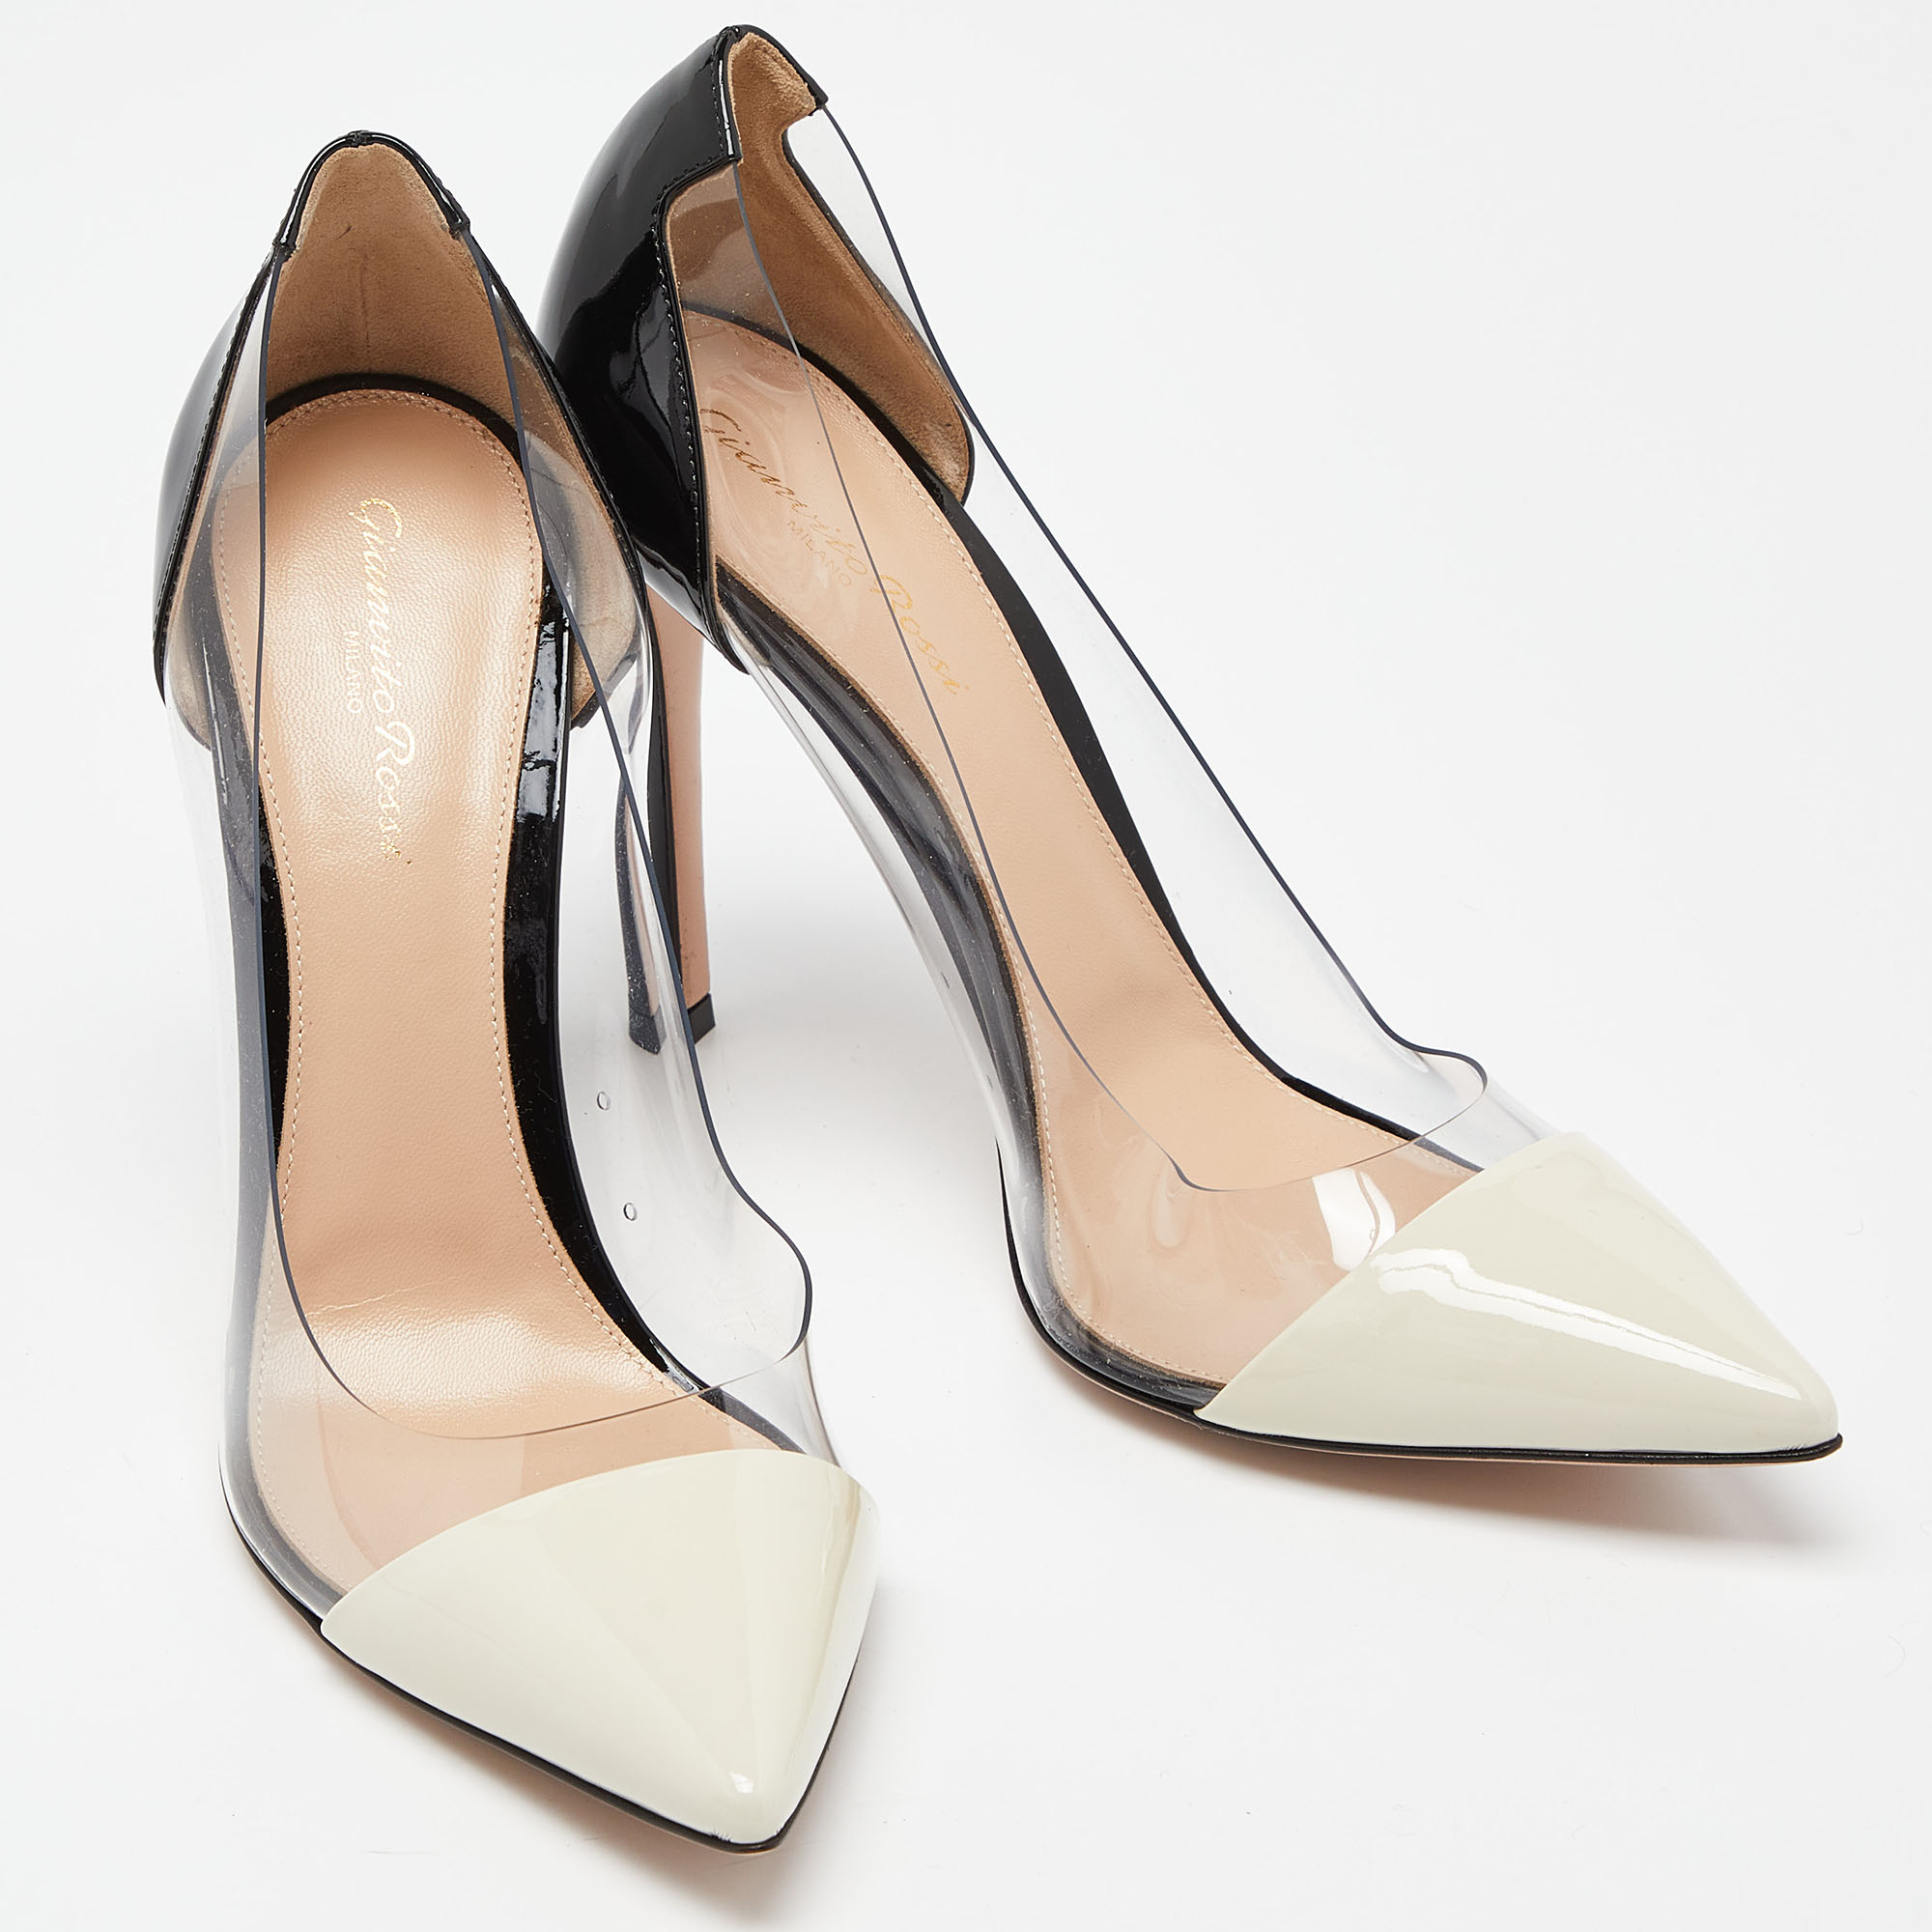 Gianvito Rossi White/Black Patent Leather And PVC Plexi Pointed Toe Pumps Size 40